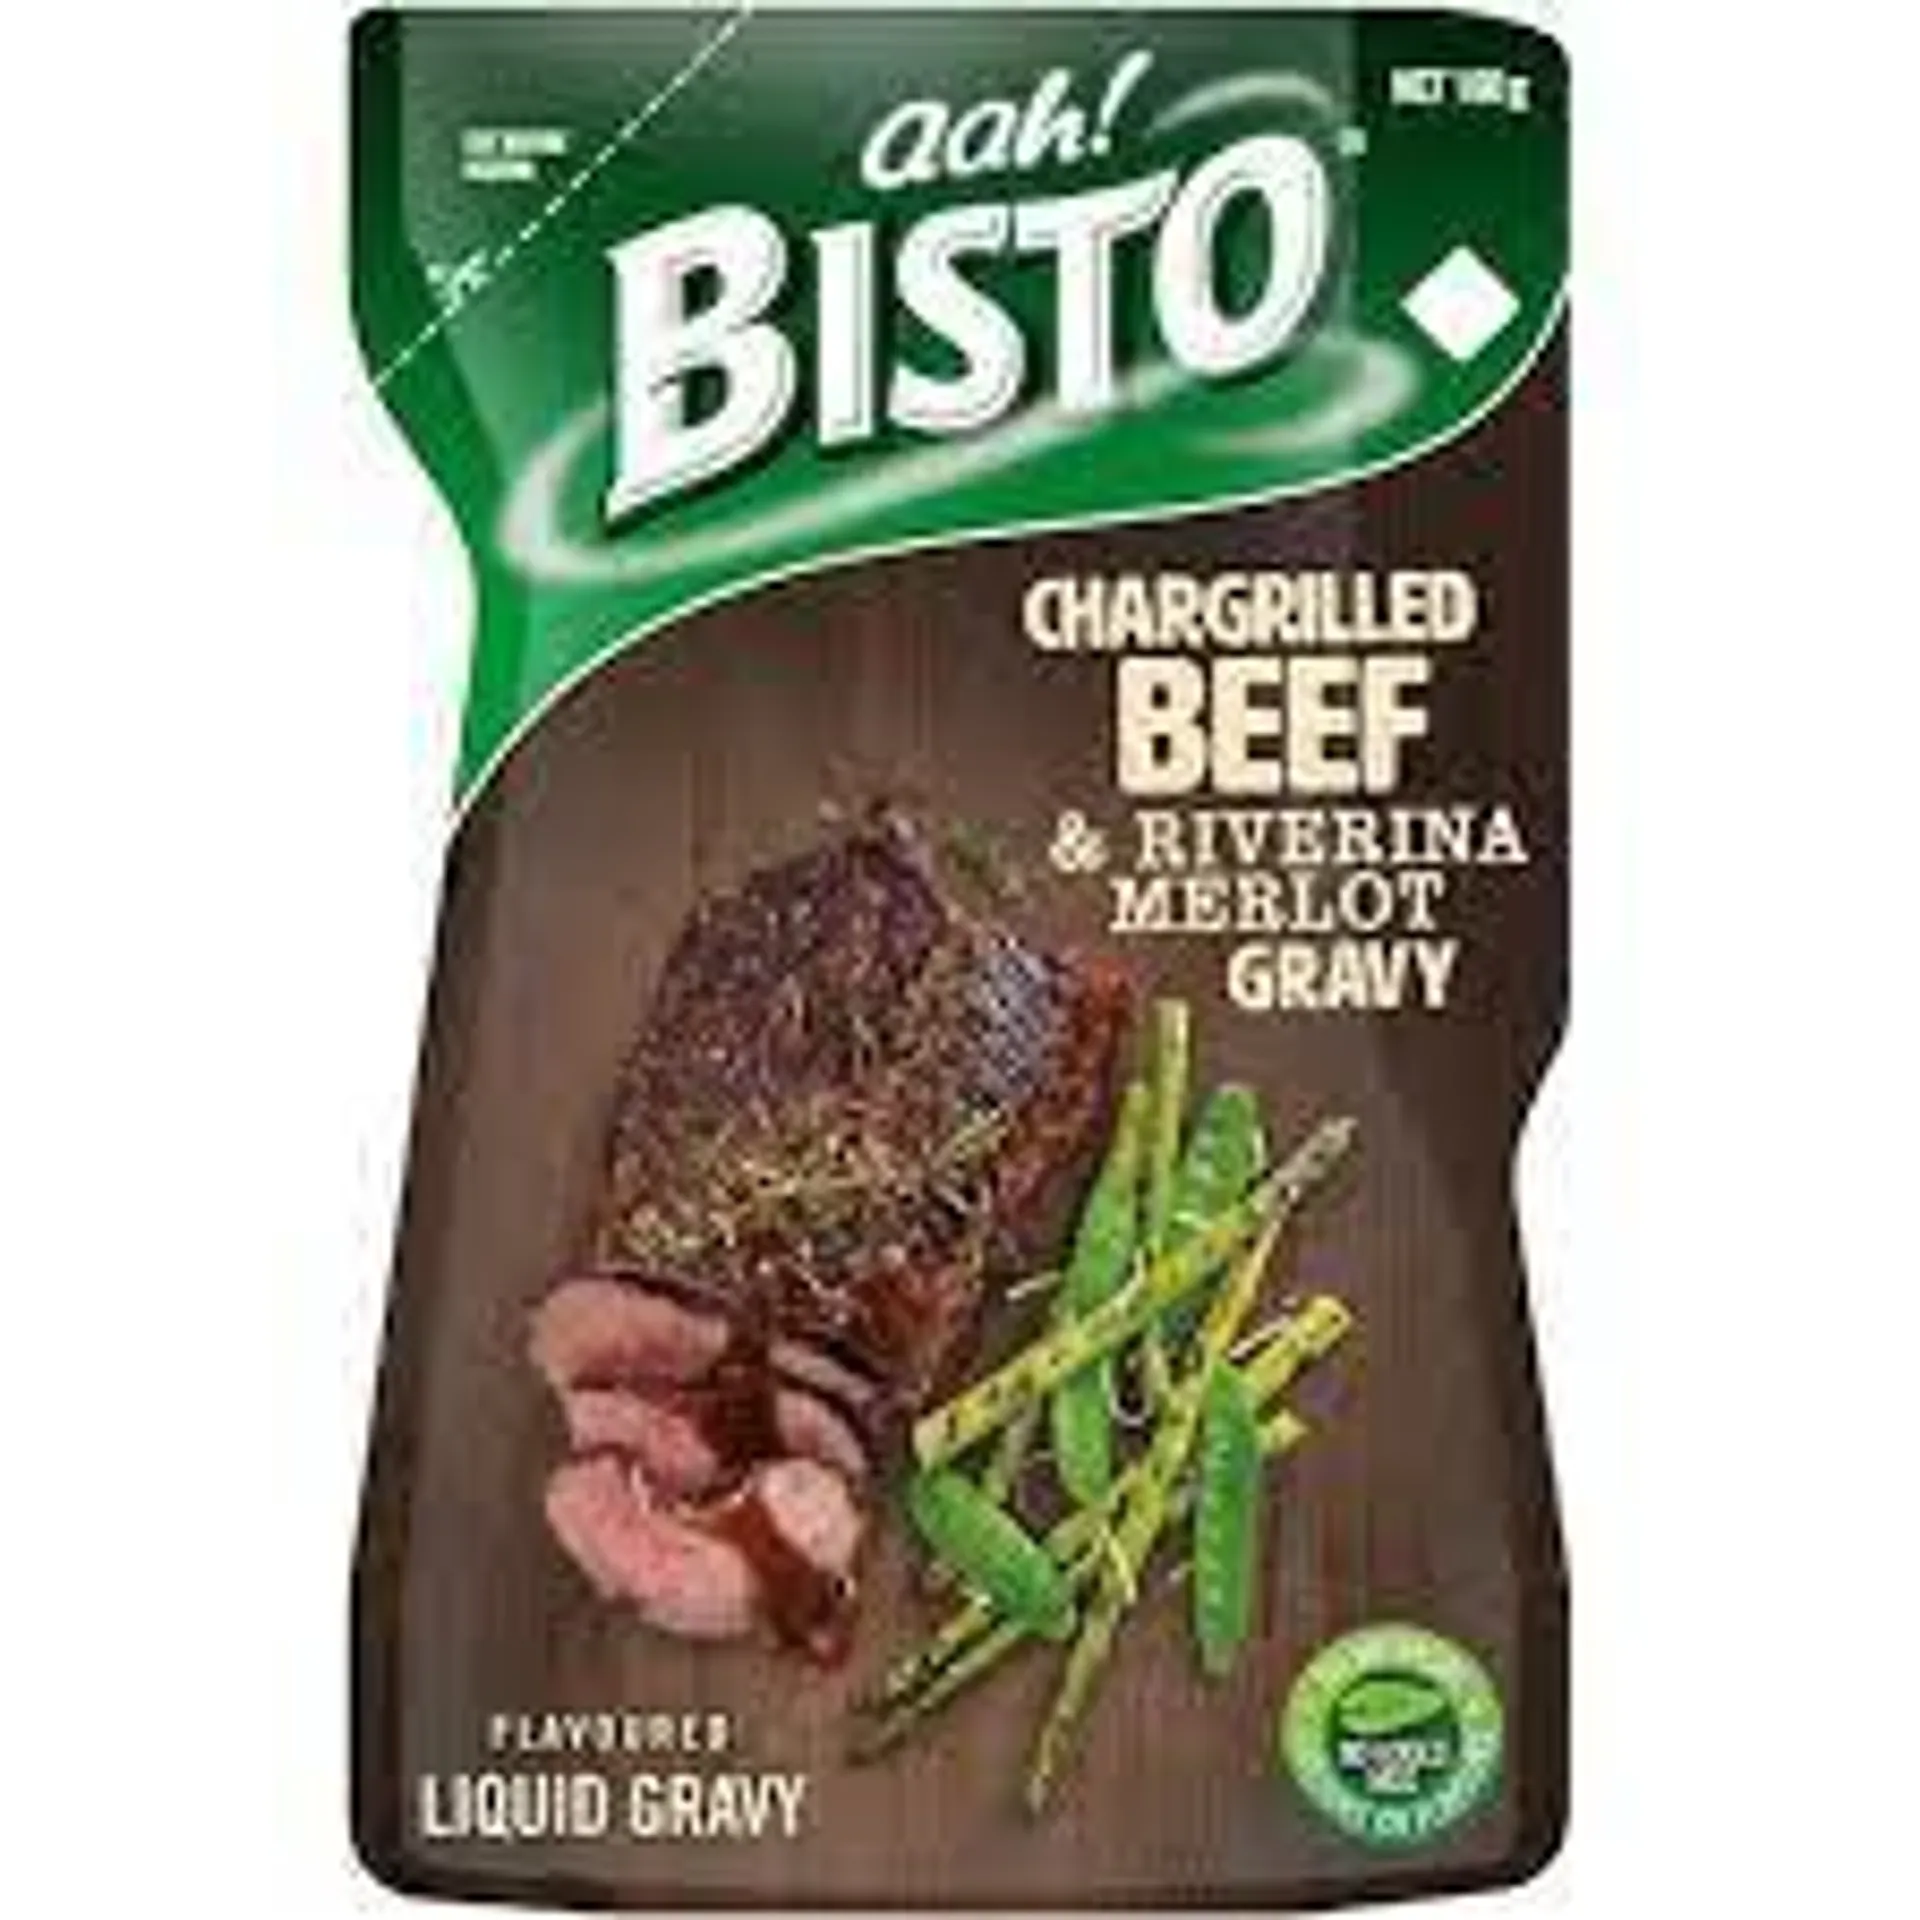 BISTO CHARGRILLED BEEF AND RIVERINA MERLOT GRAVY